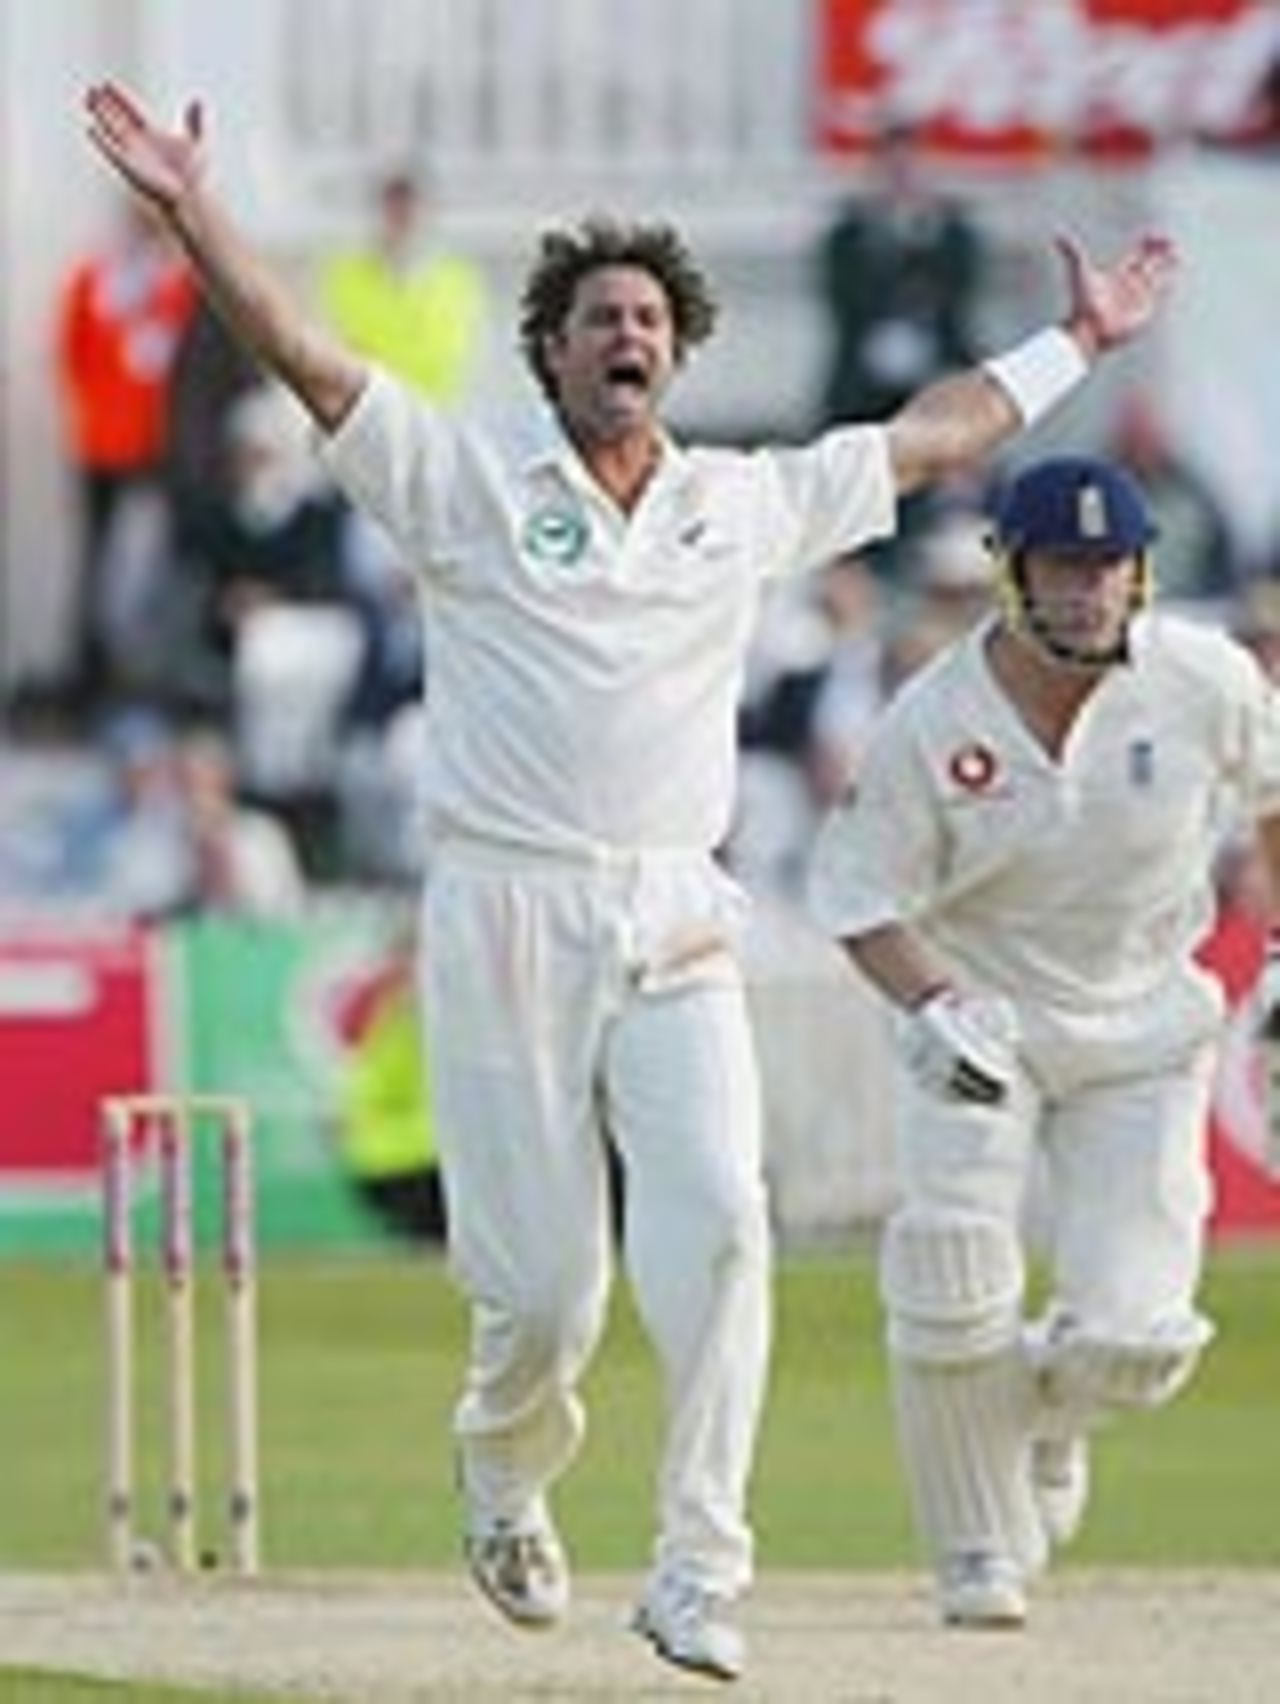 Chris Cairns celebrates the wicket of Andrew Flintoff, England v New Zealand, Trent Bridge, 2nd day, June 11, 2004